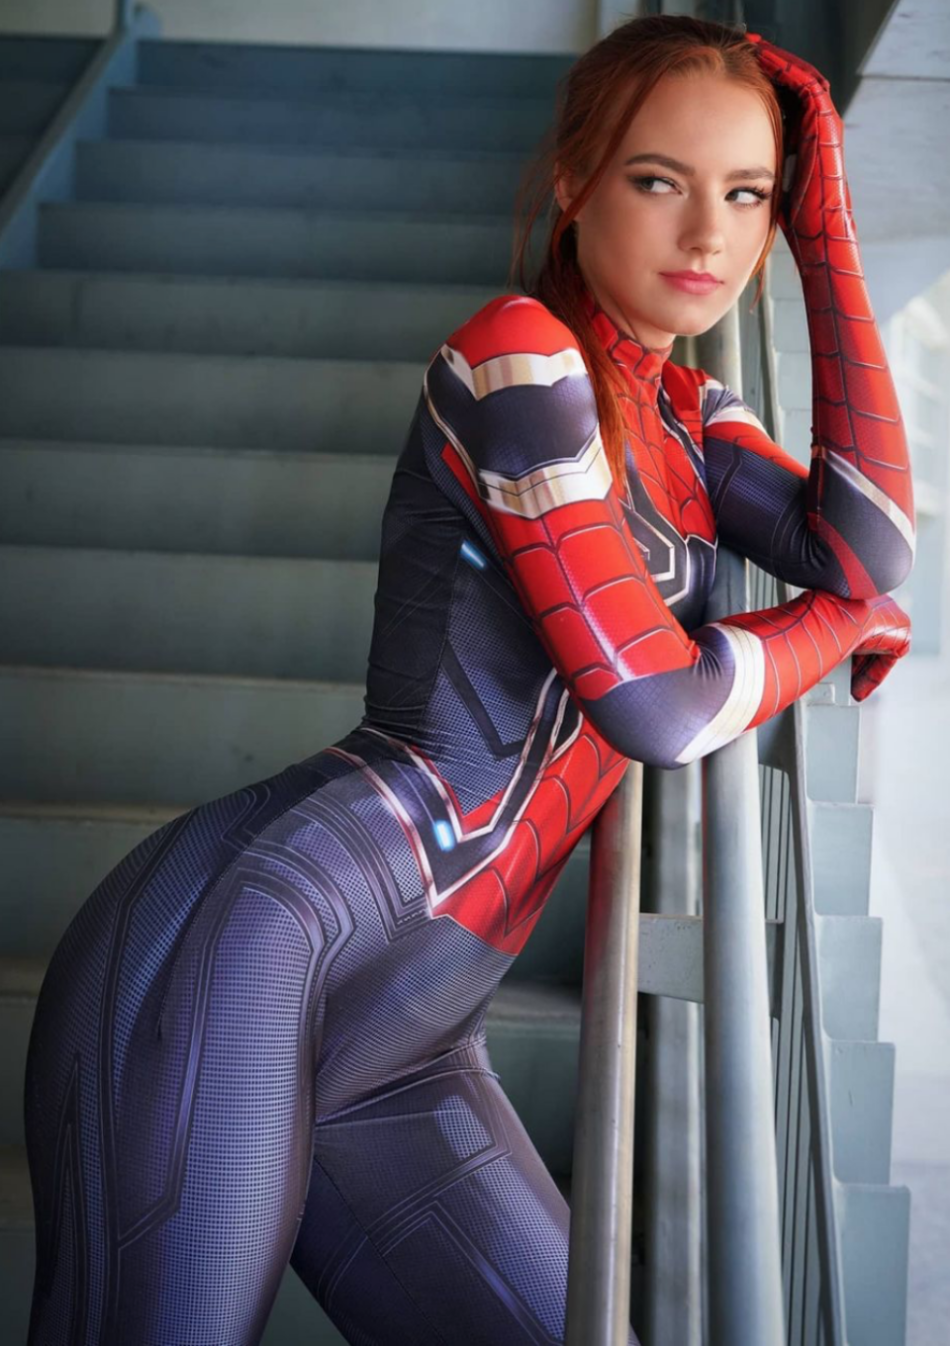 Sexy Red Hot Cosplay Girls Spiderman Women Best Photo Compilation 2021 (89 HQ Photos) 102